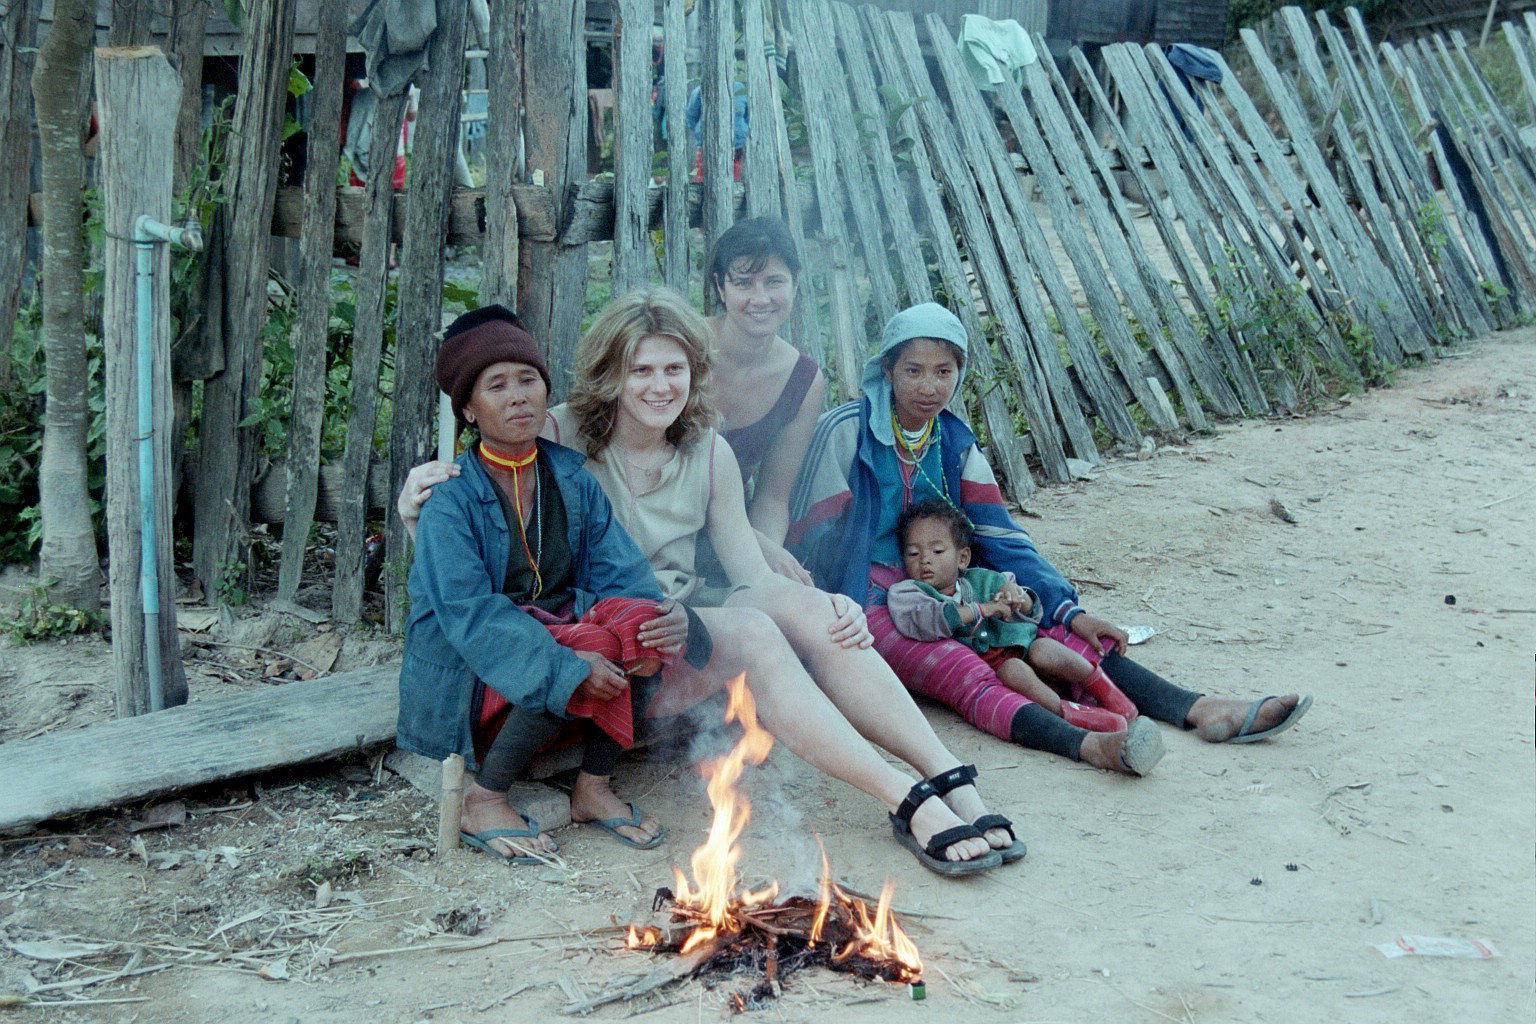 Tourists visit local tribe in North Thailand - Mar 2003